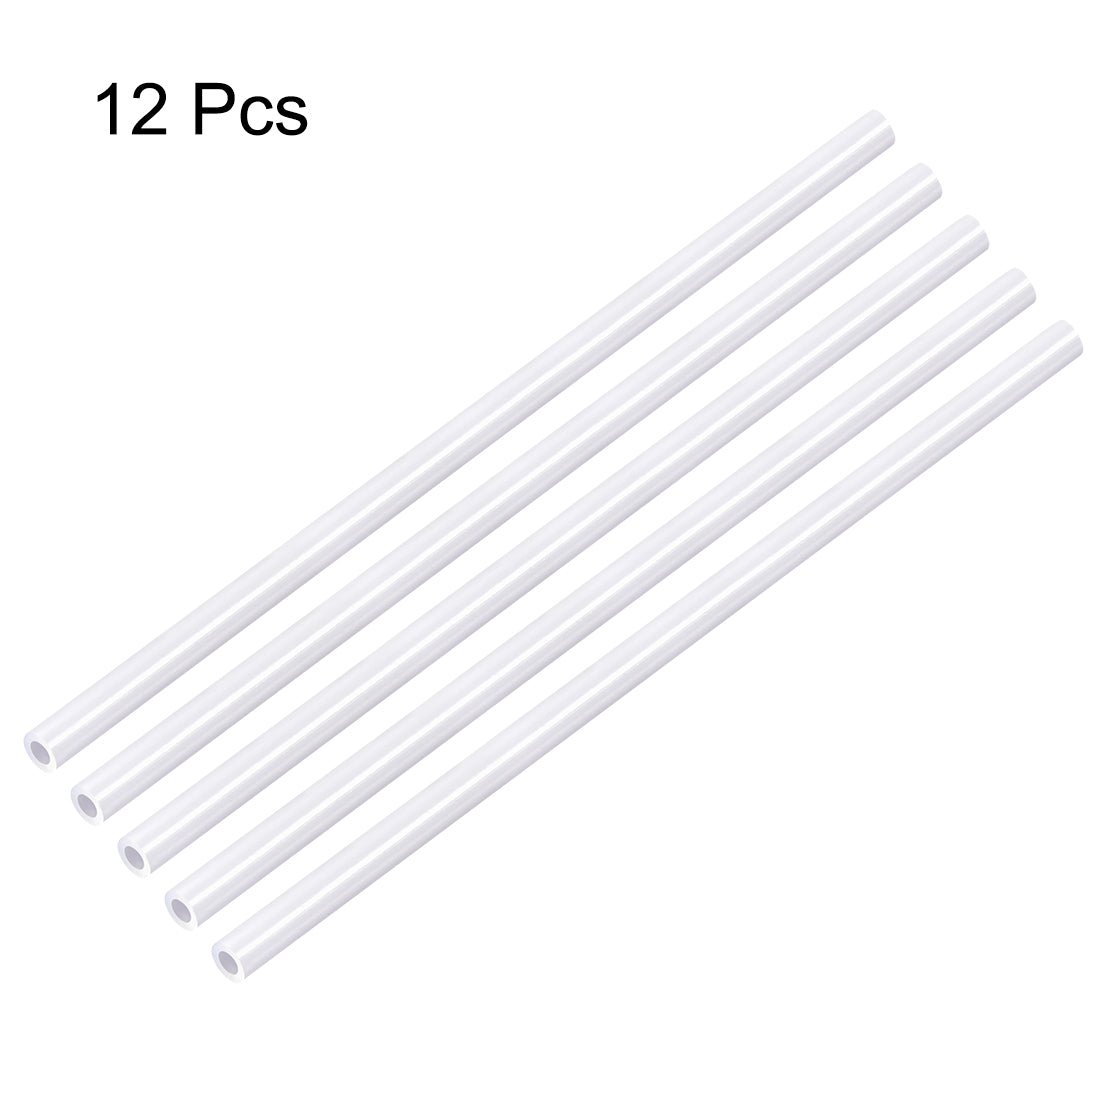 uxcell Uxcell ABS Model Round Tubing,3mm Diameter,0.5M/1.64Ft Length,for Architectural Model Layout Making Materials,12pcs